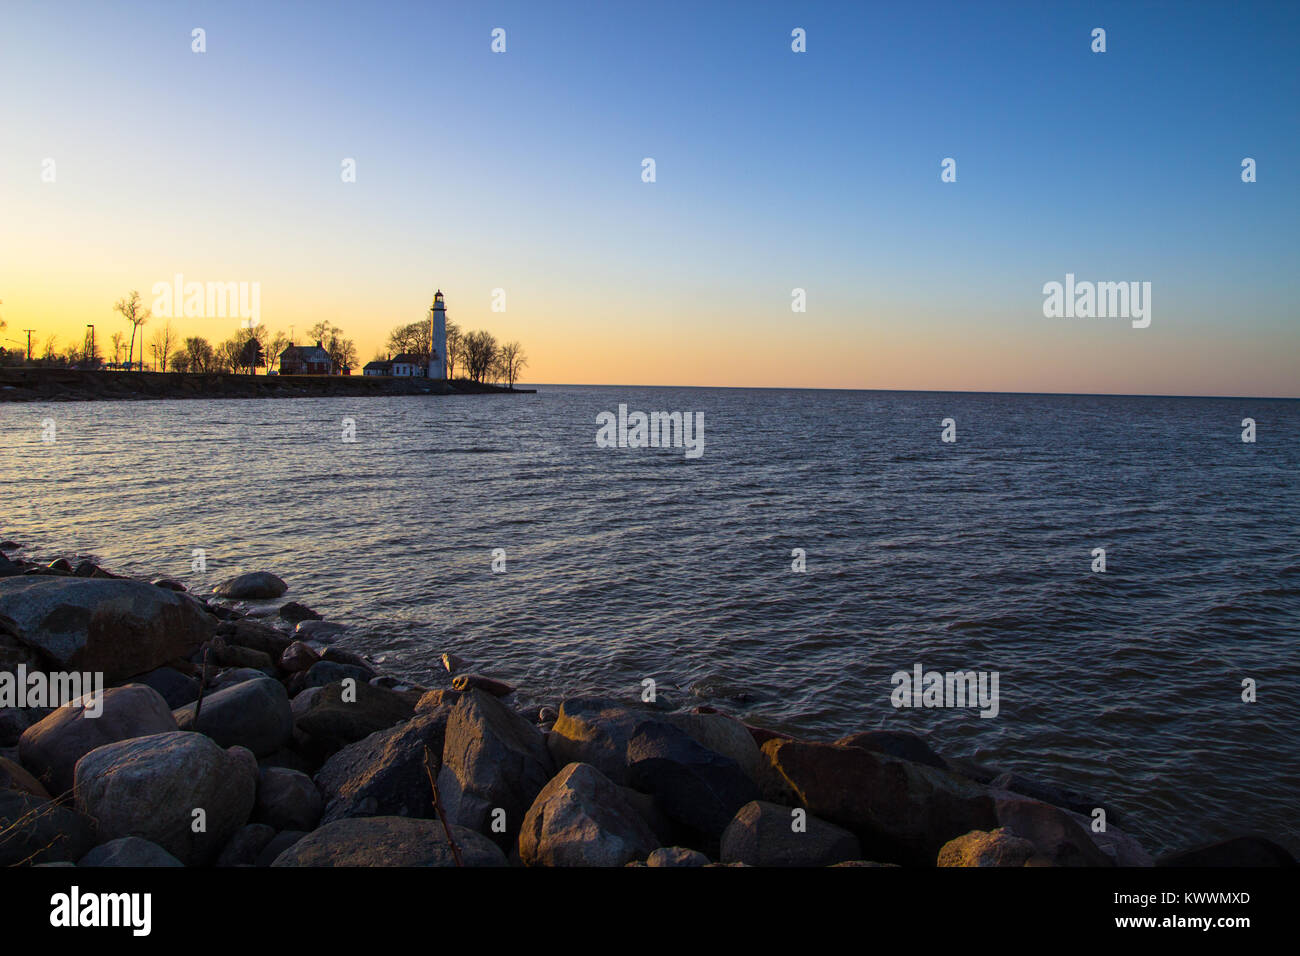 Distant Lighthouse Shore. Lighthouse on the distant shore of Lake Huron at sunrise. Point Aux Barques Lighthouse, Port Hope, Michigan, USA. Stock Photo